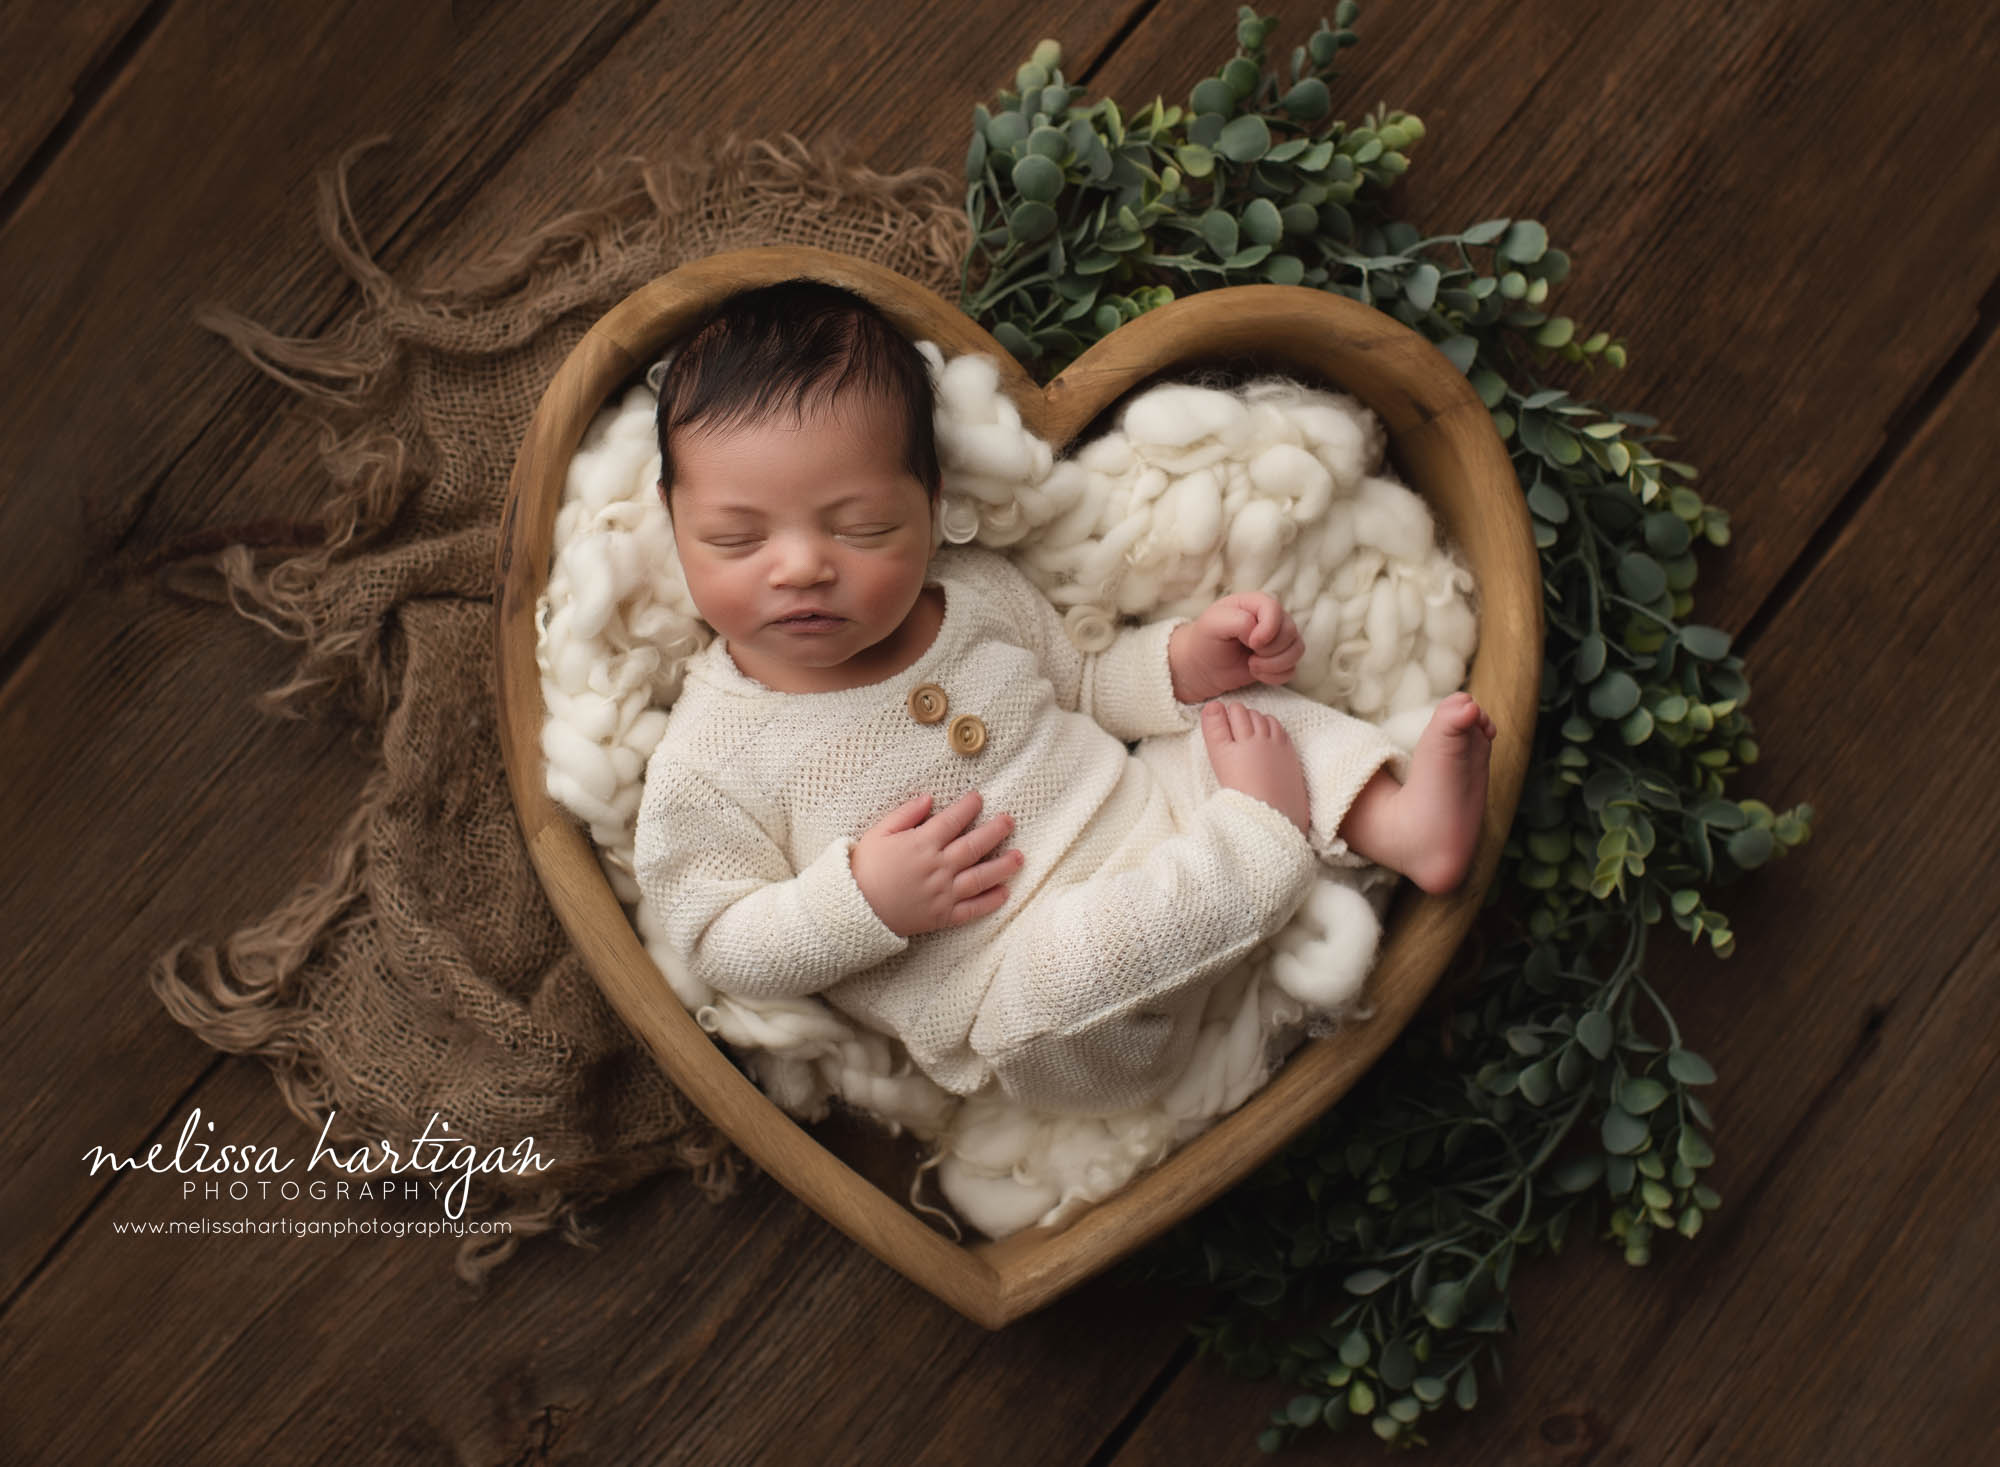 Baby boy wearing cream newborn outfit posed in wooden heart prop